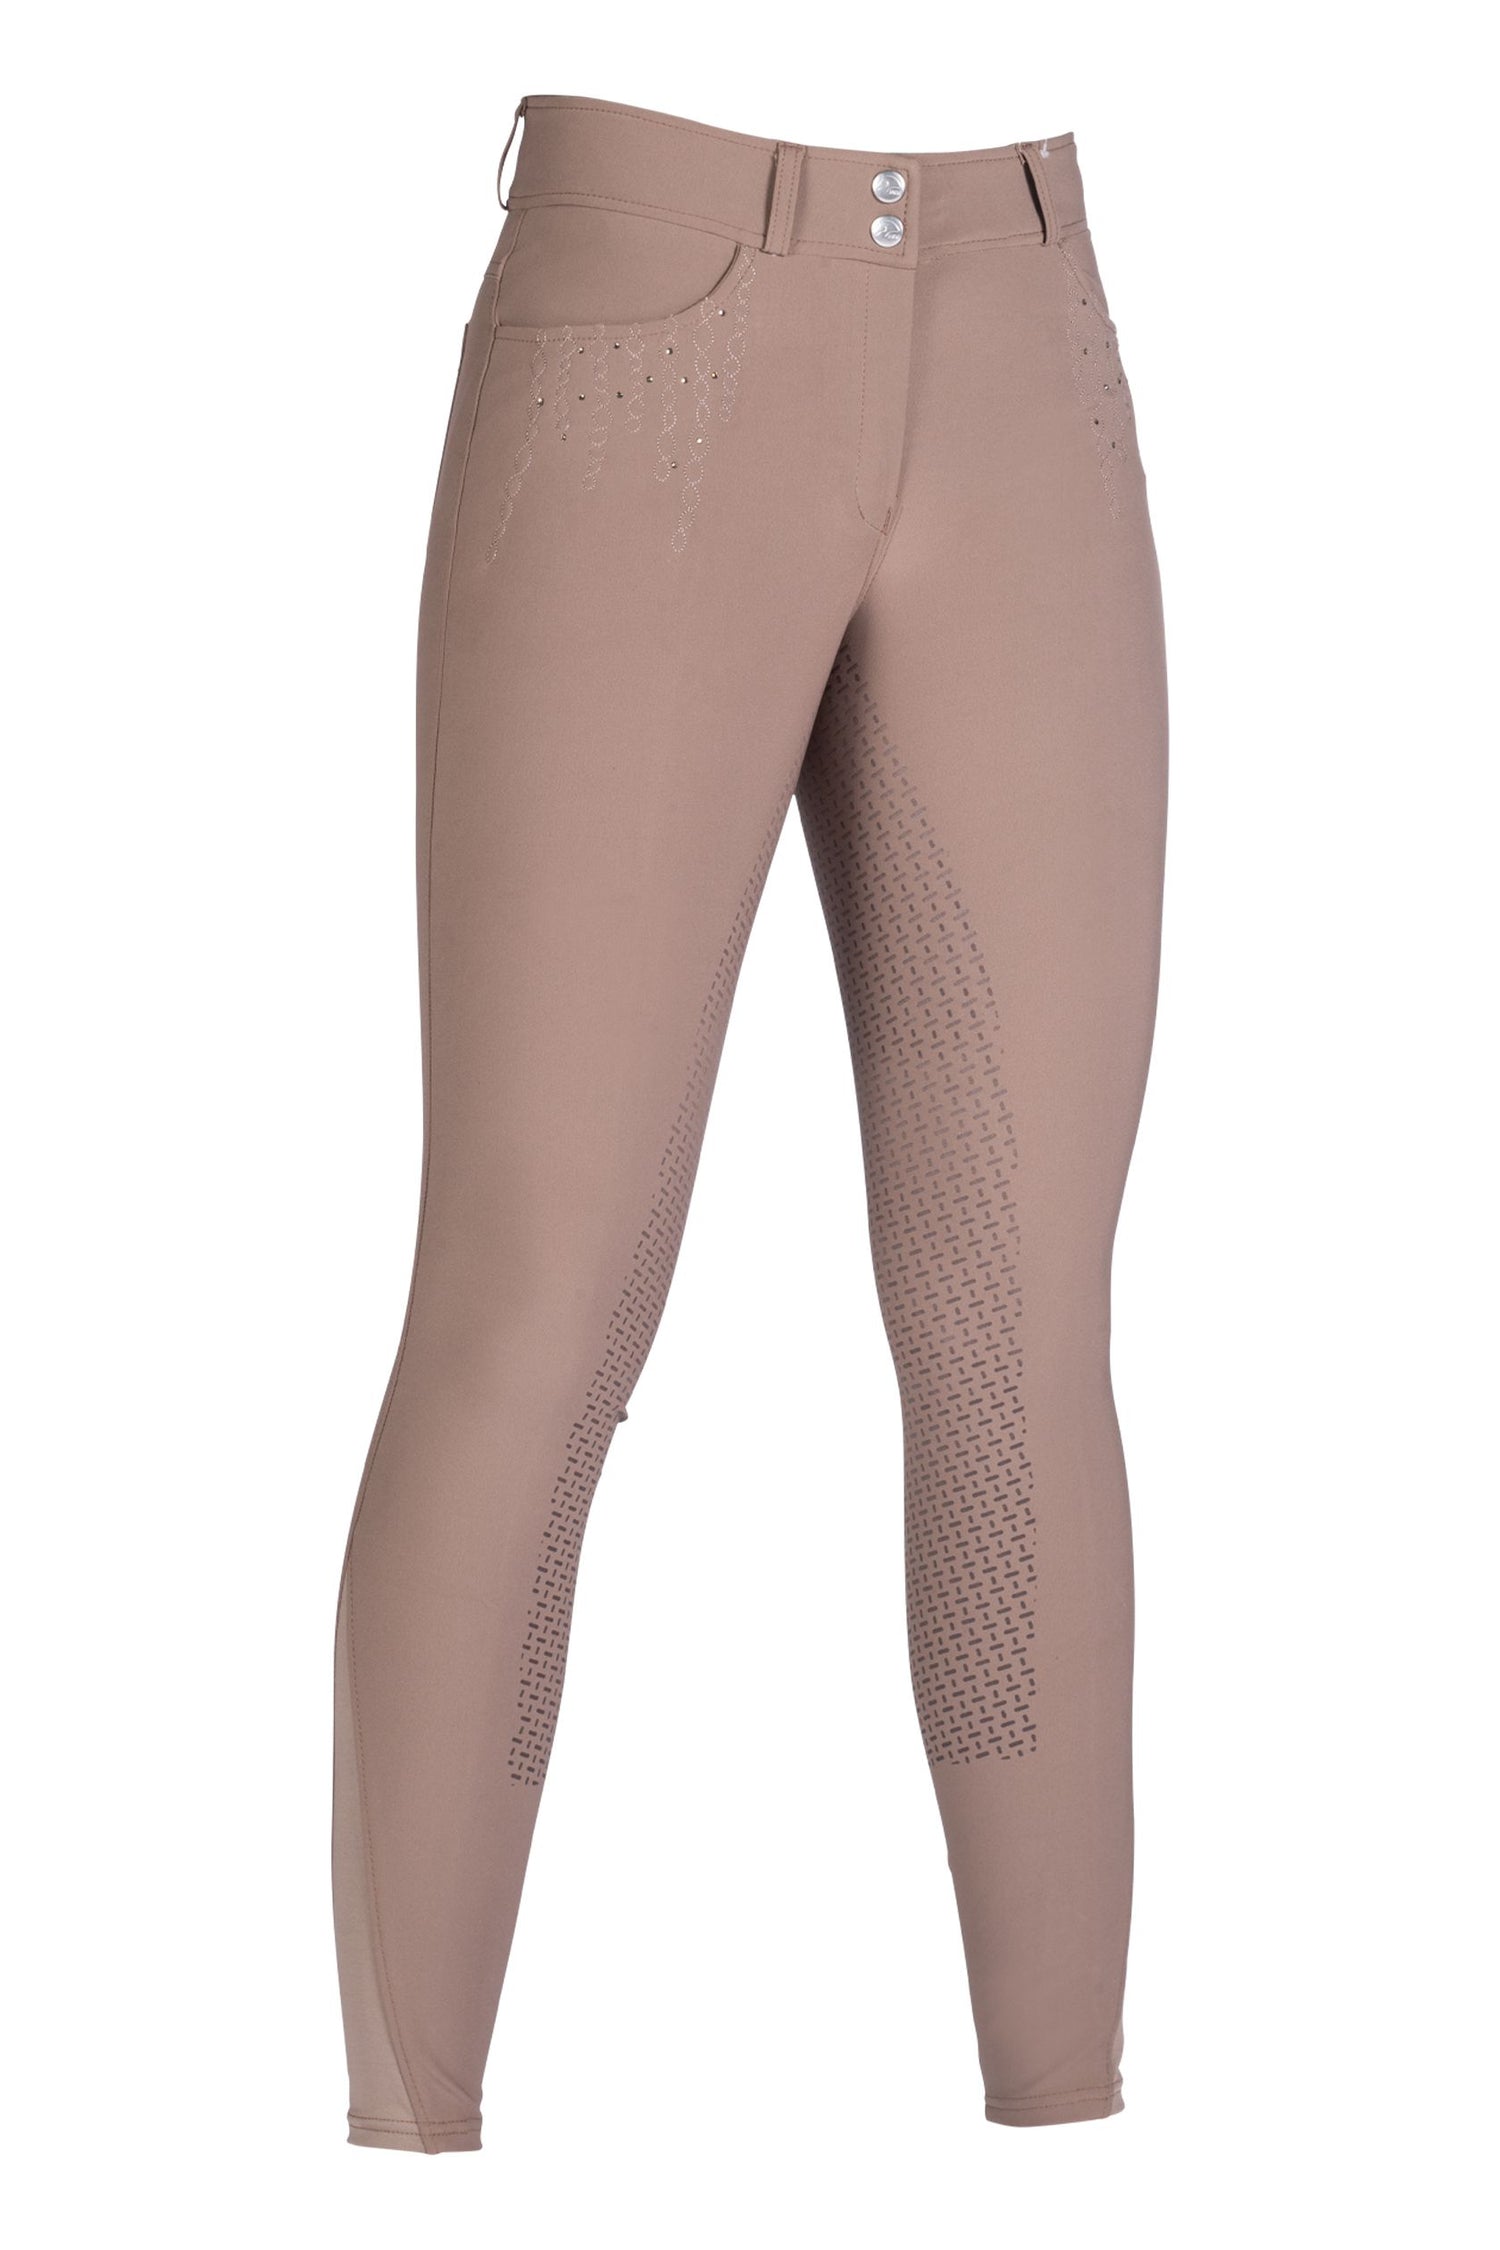 HKM Riding leggings -Cosy- Style silicone full seat